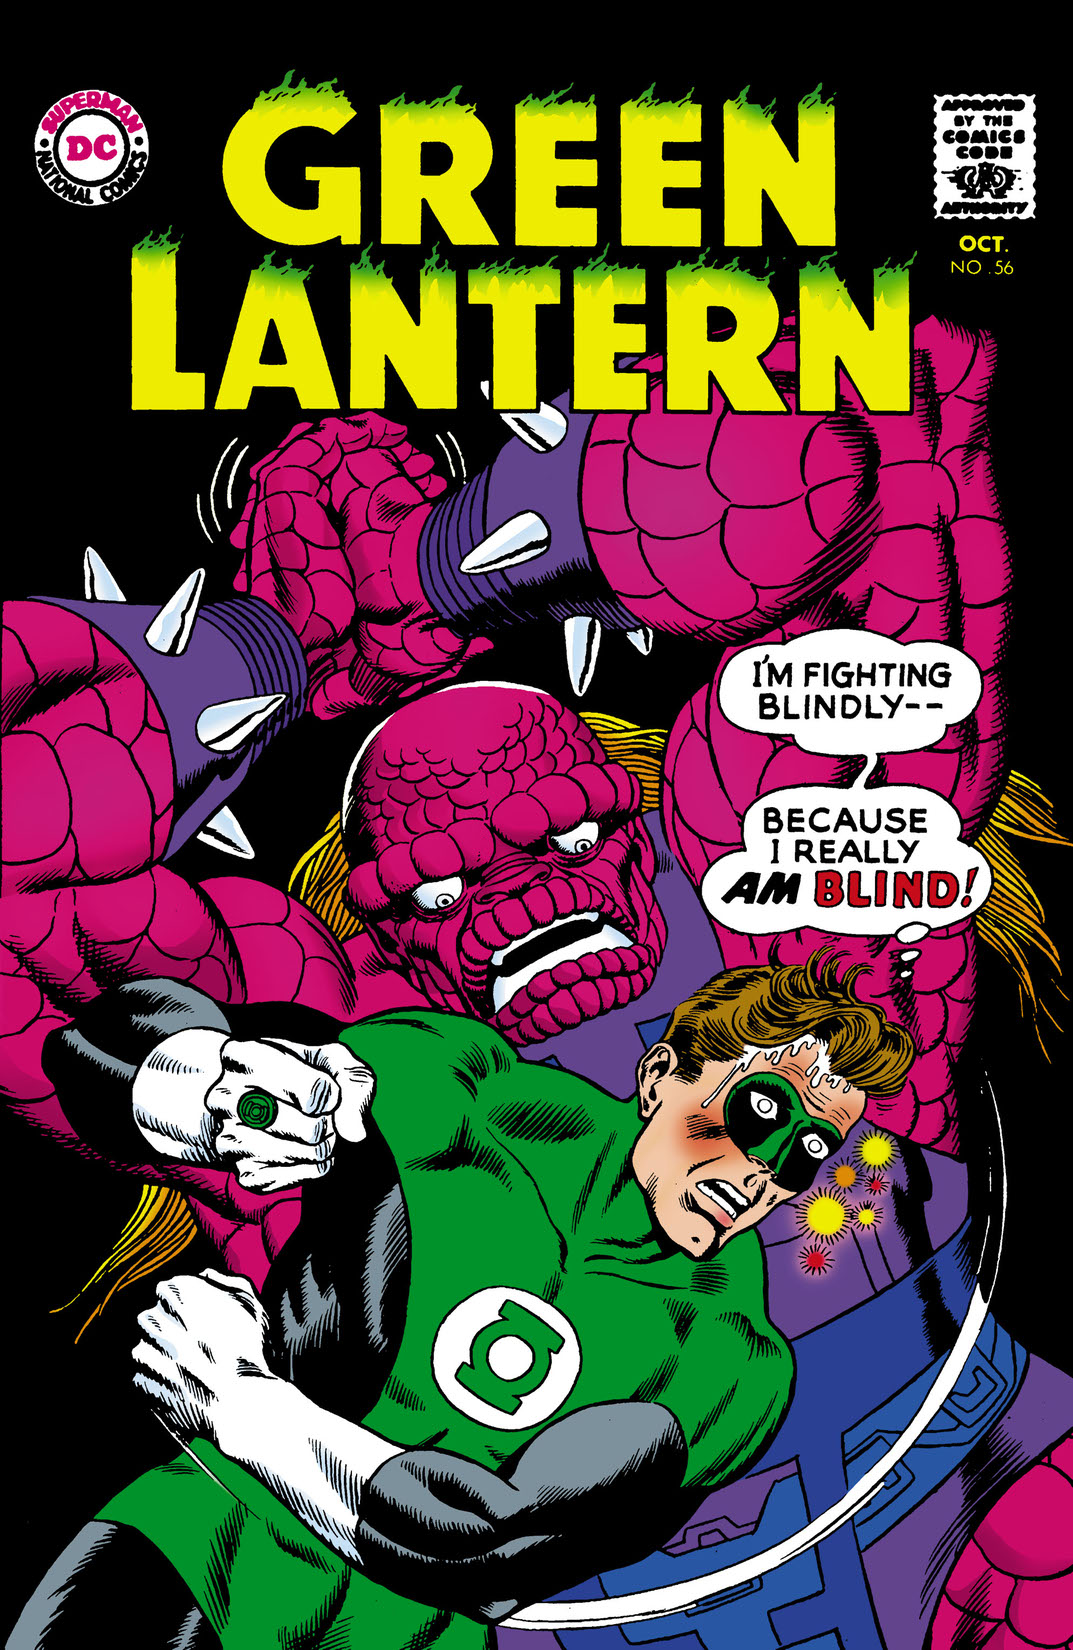 Green Lantern (1960-) #56 preview images